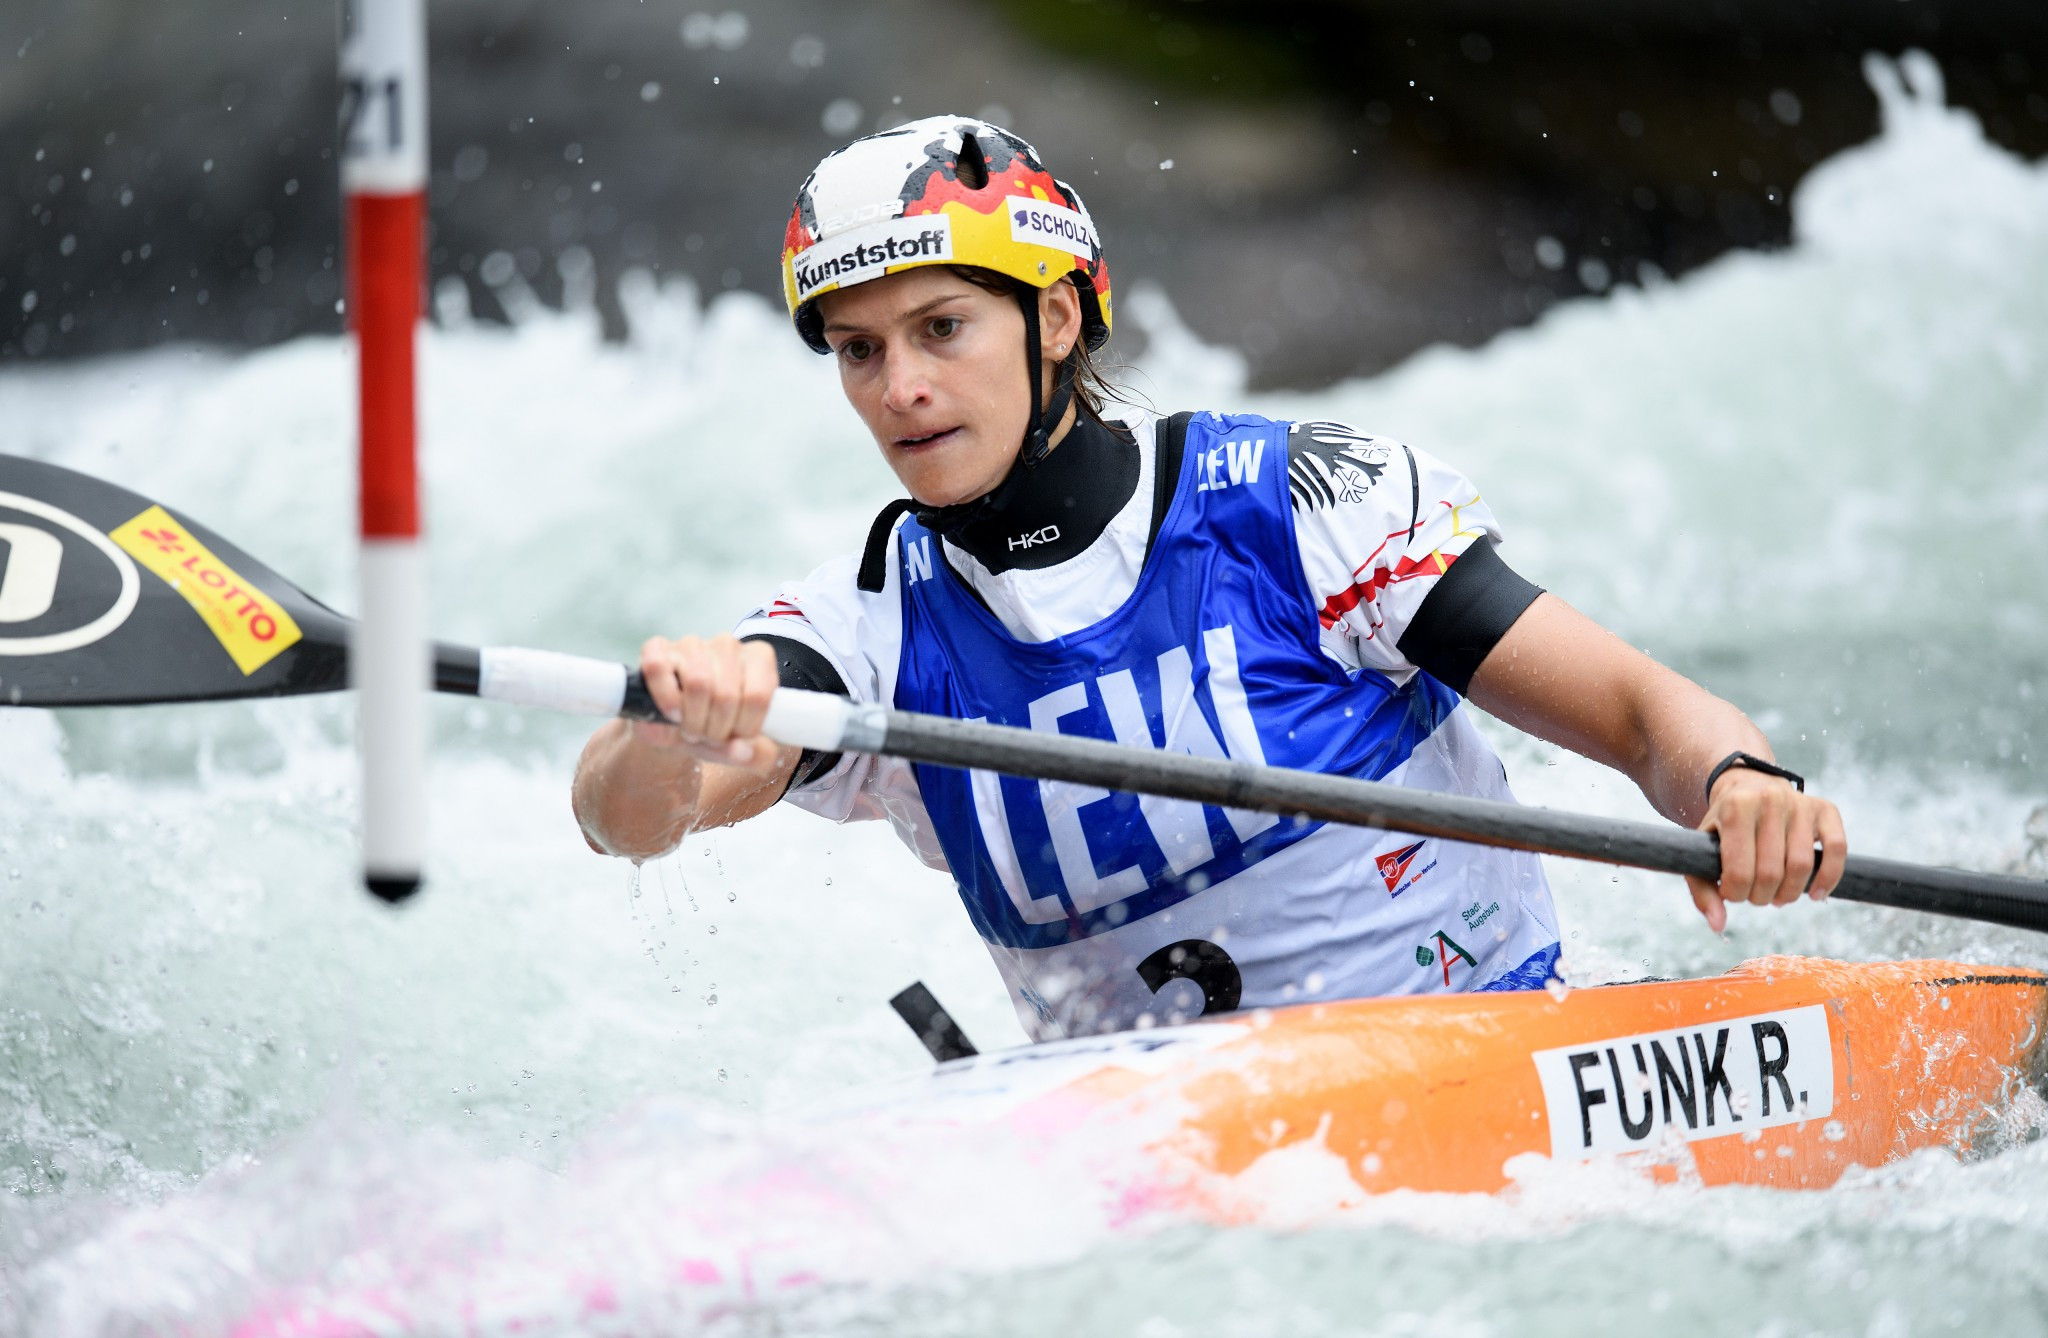 Funk and Tasiadis secure overall titles as Canoe Slalom World Cup season concludes in Barcelona